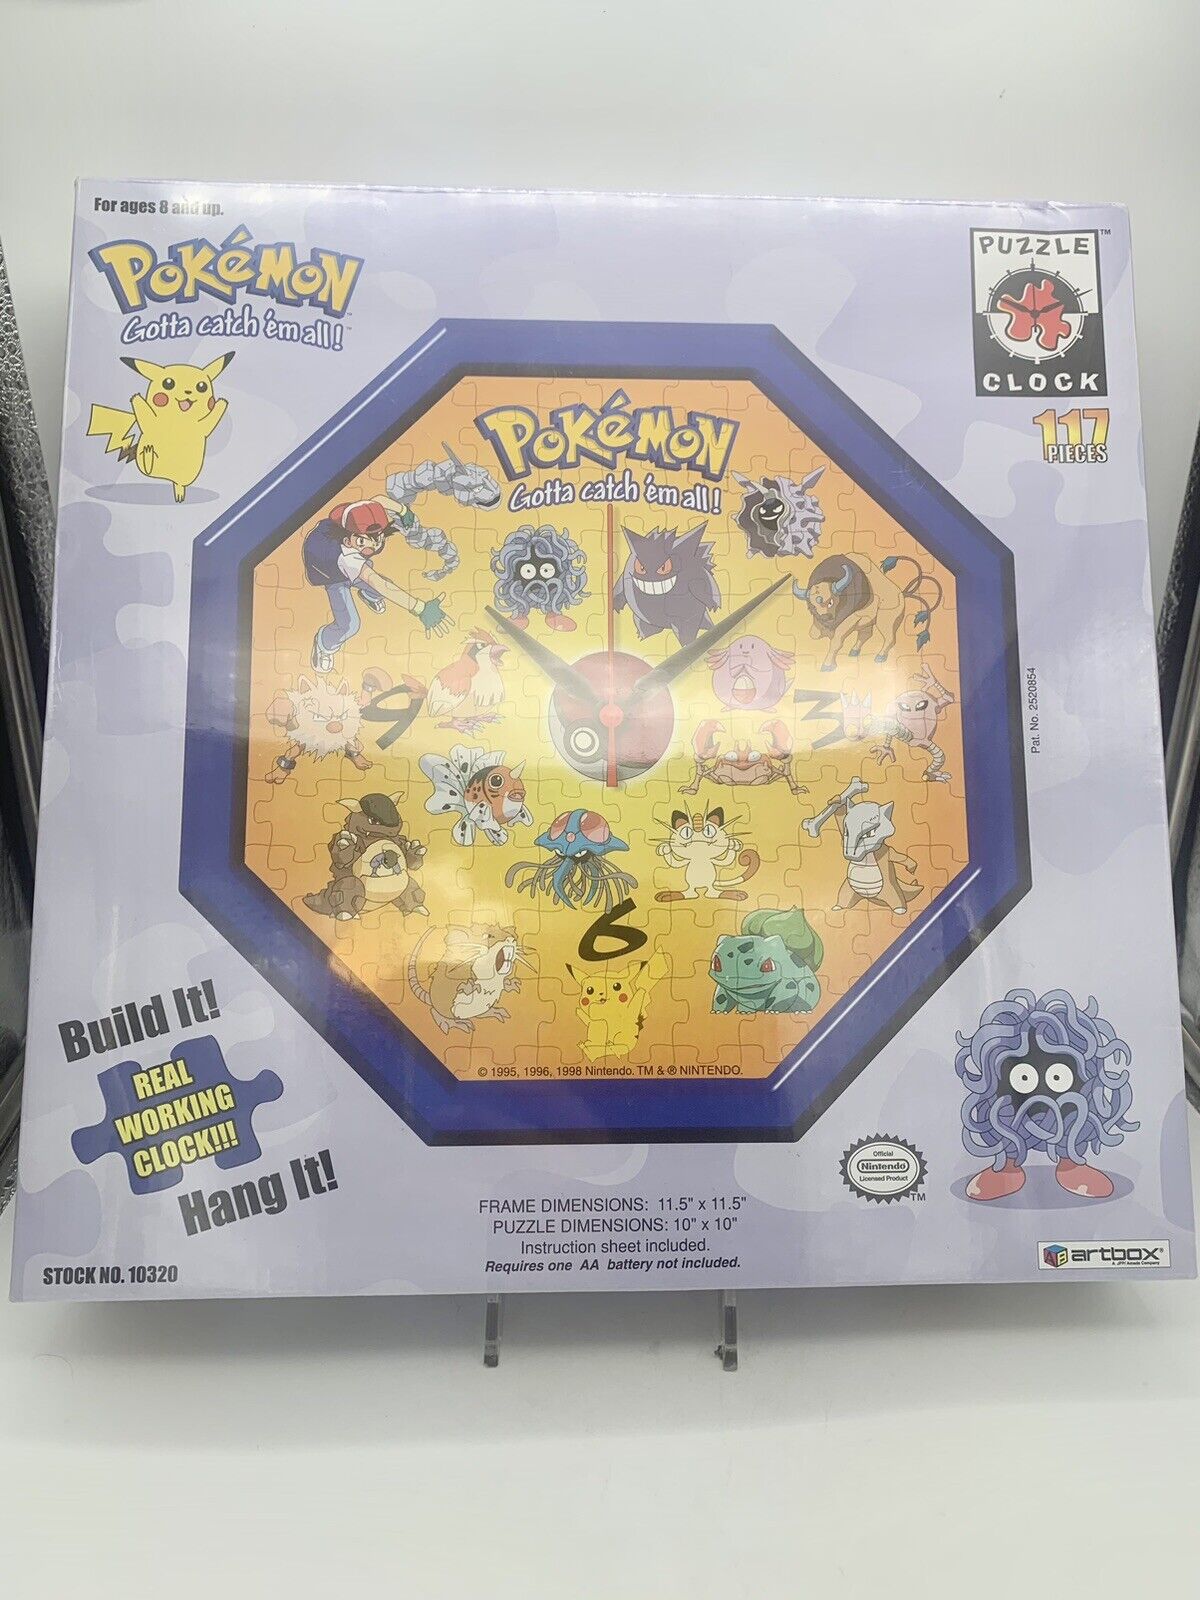 1998 Pokémon Puzzle Clock Official NINTENDO Licensed Product, SEALED NEW IN BOX